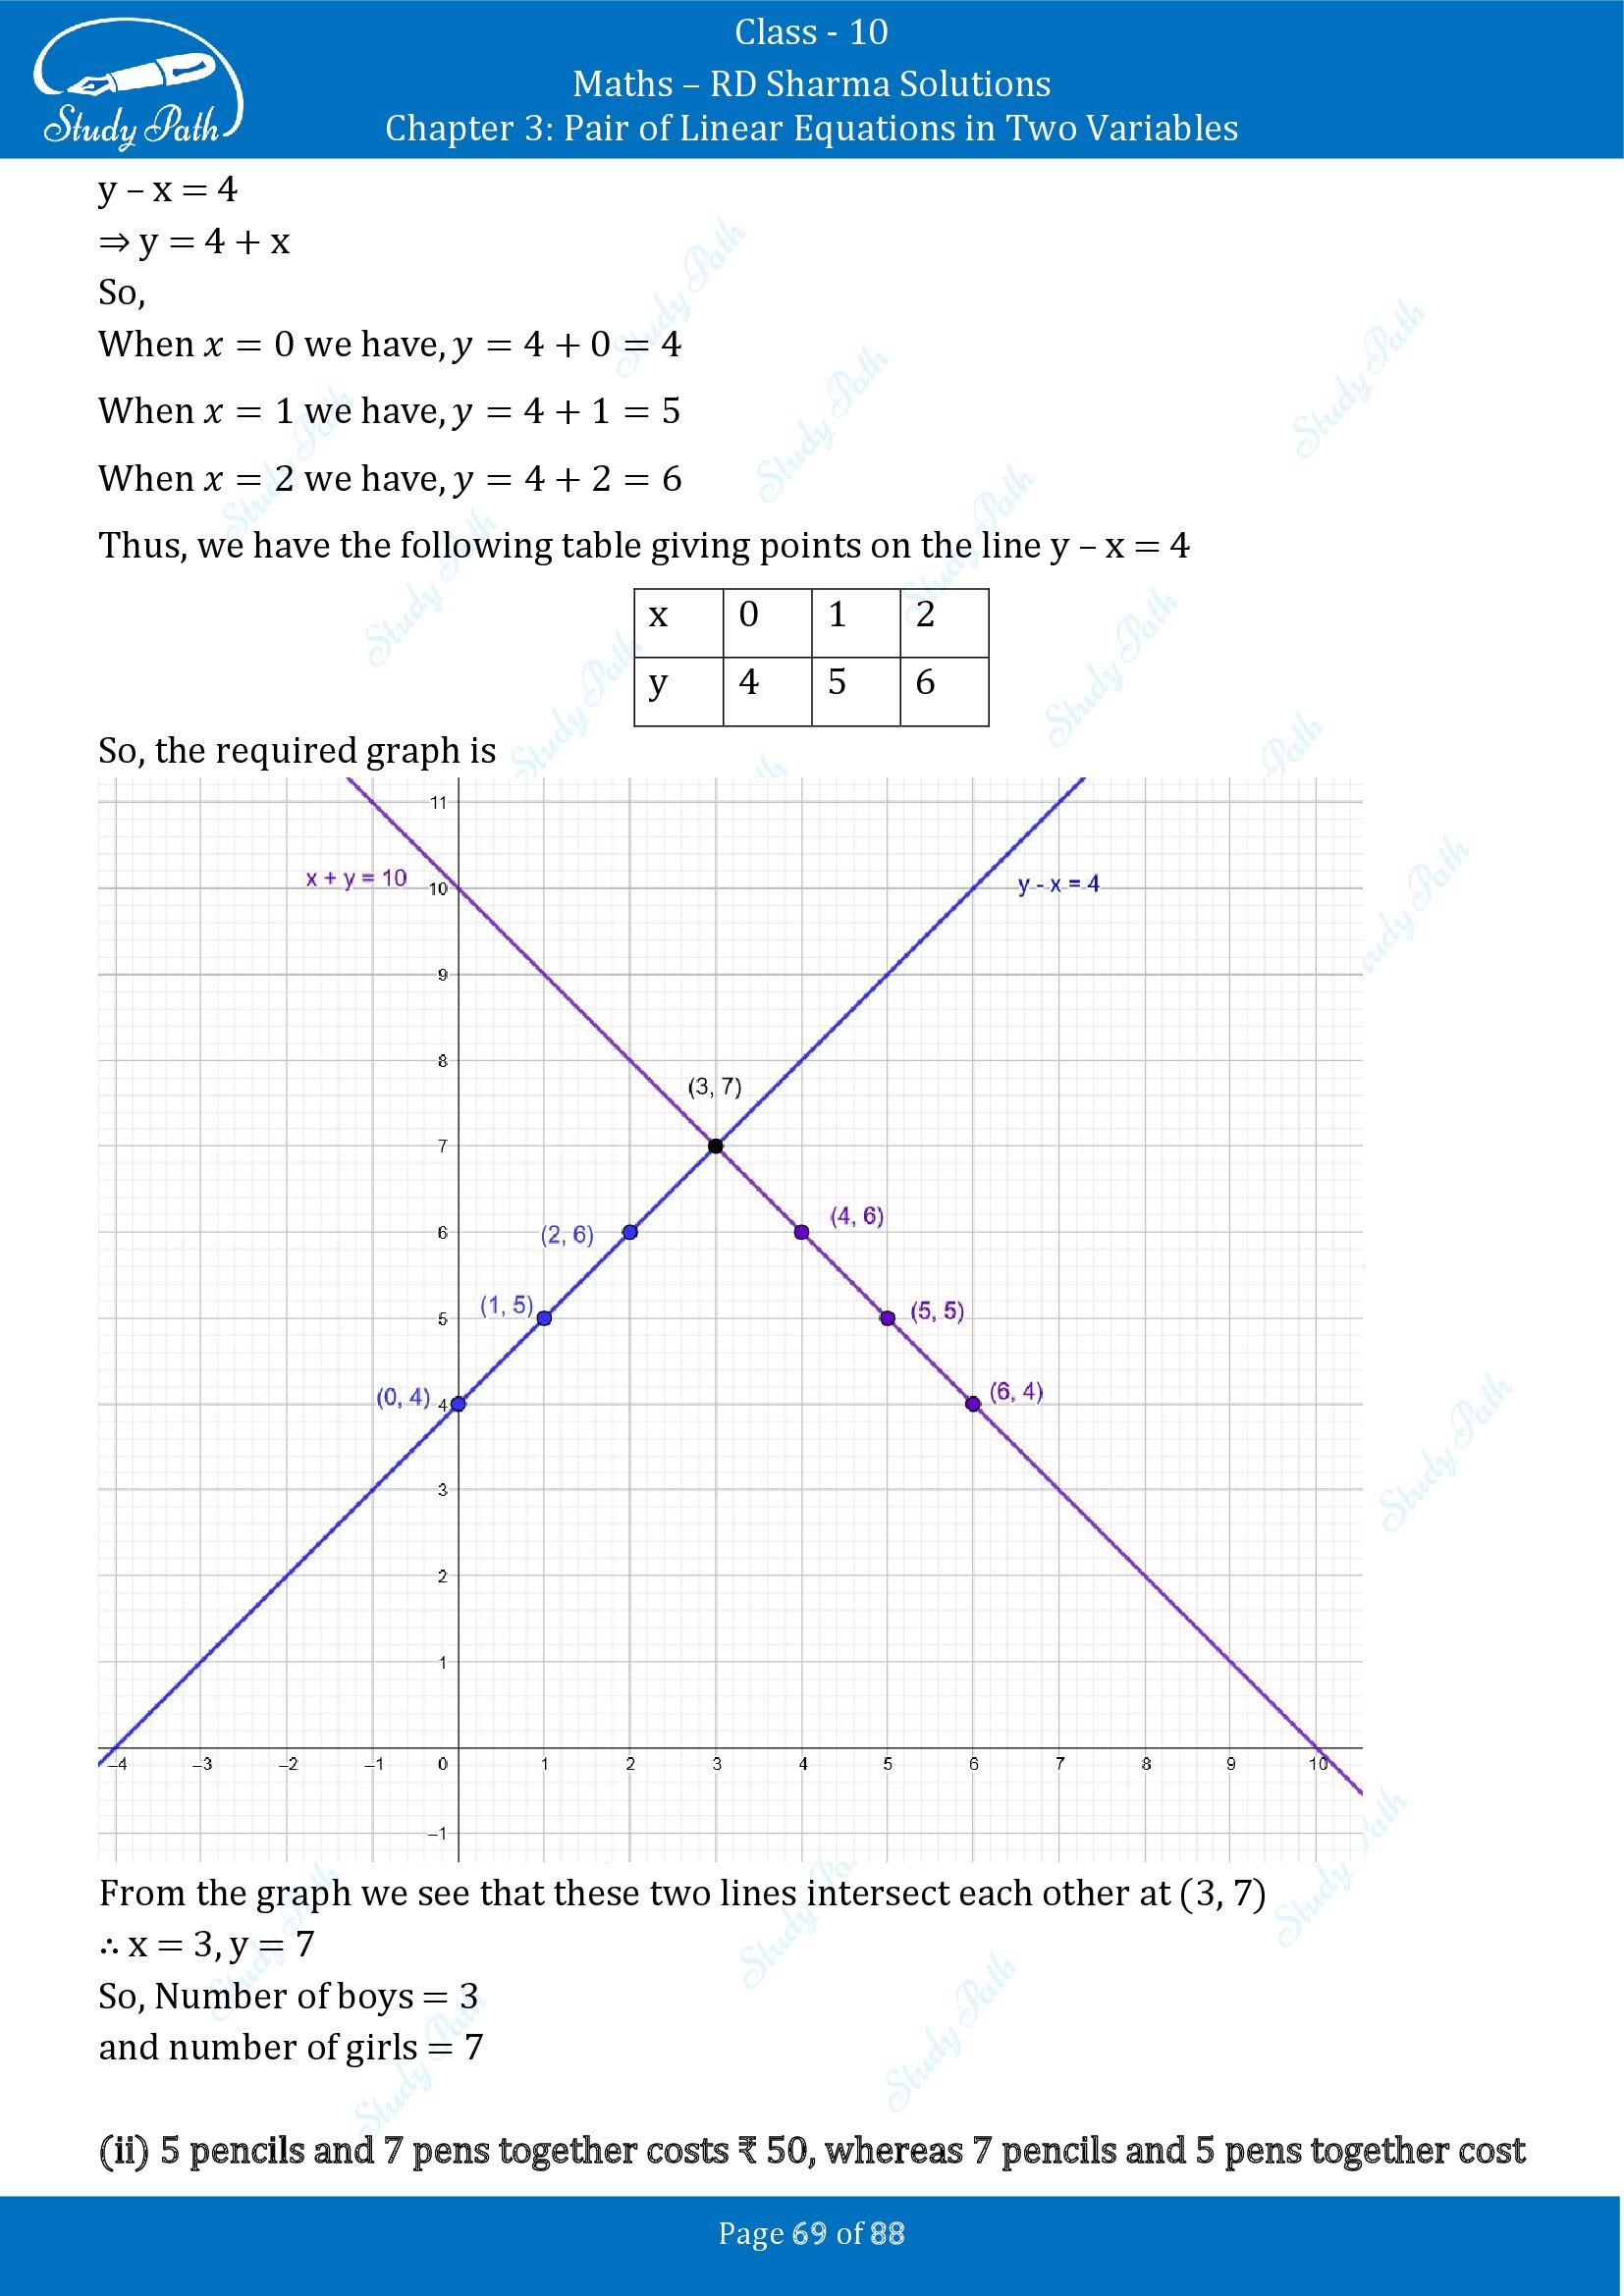 RD Sharma Solutions Class 10 Chapter 3 Pair of Linear Equations in Two Variables Exercise 3.2 00069